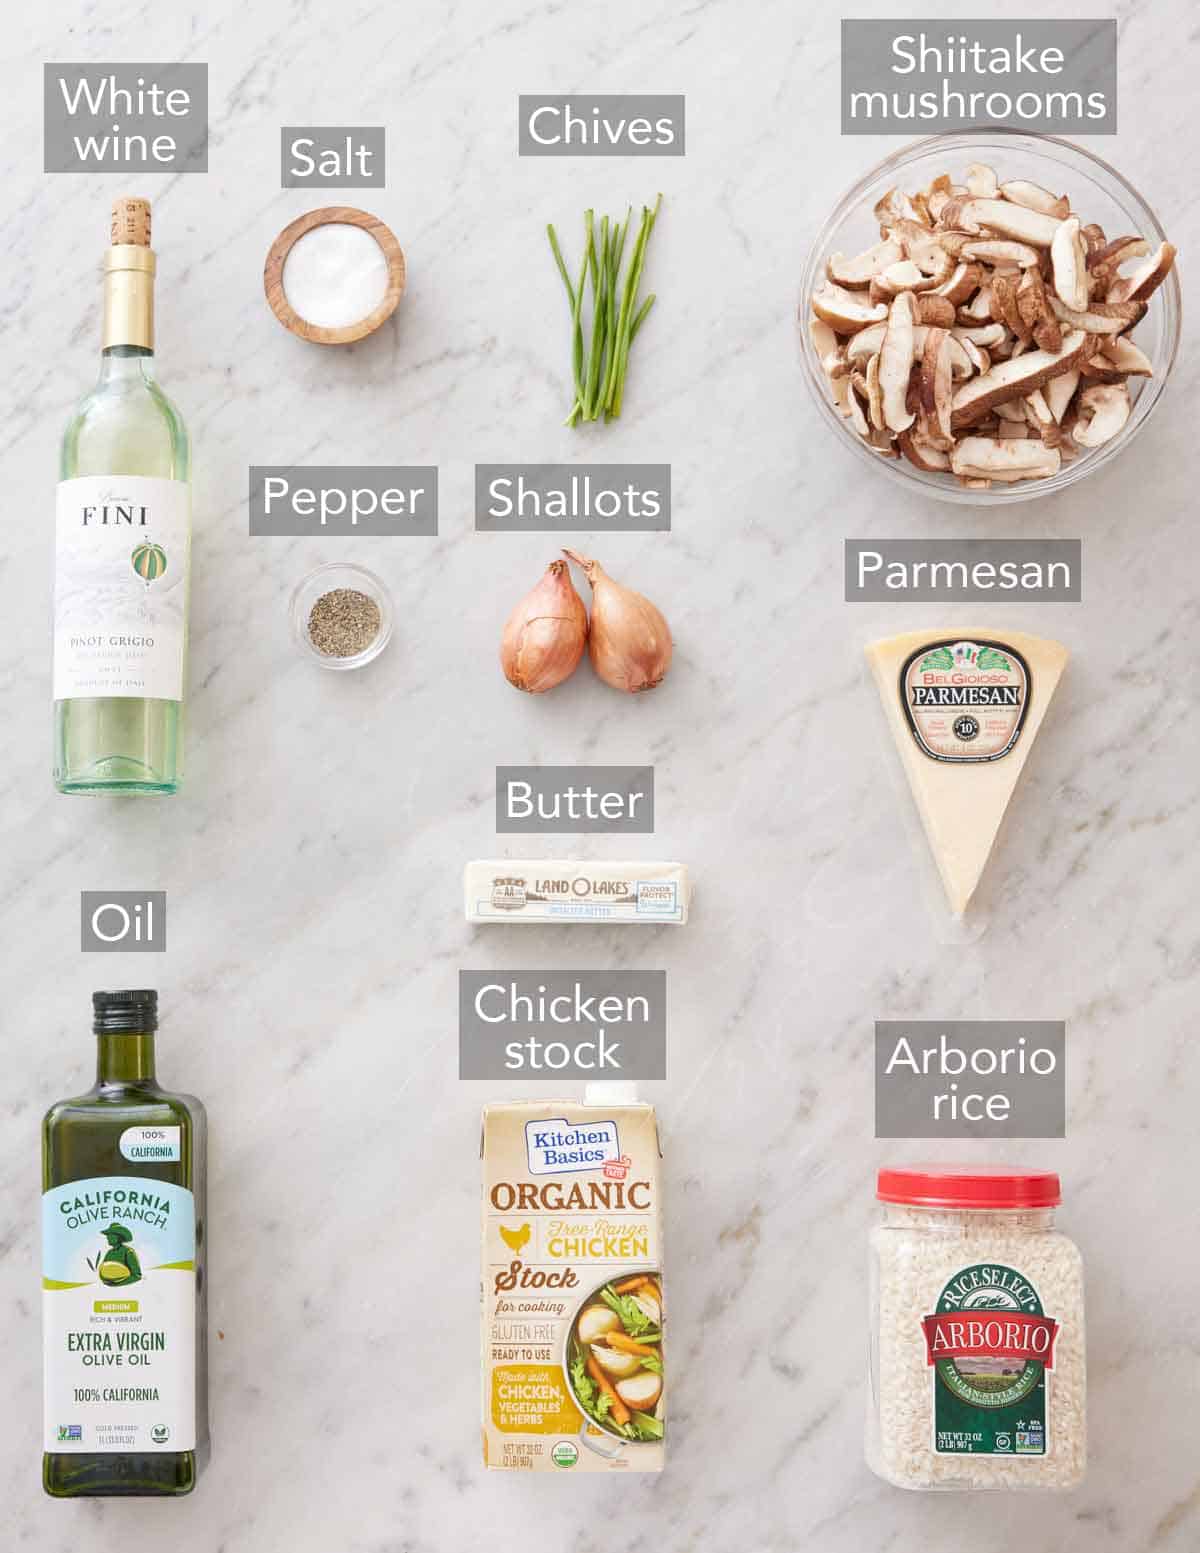 Ingredients needed to make mushroom risotto.